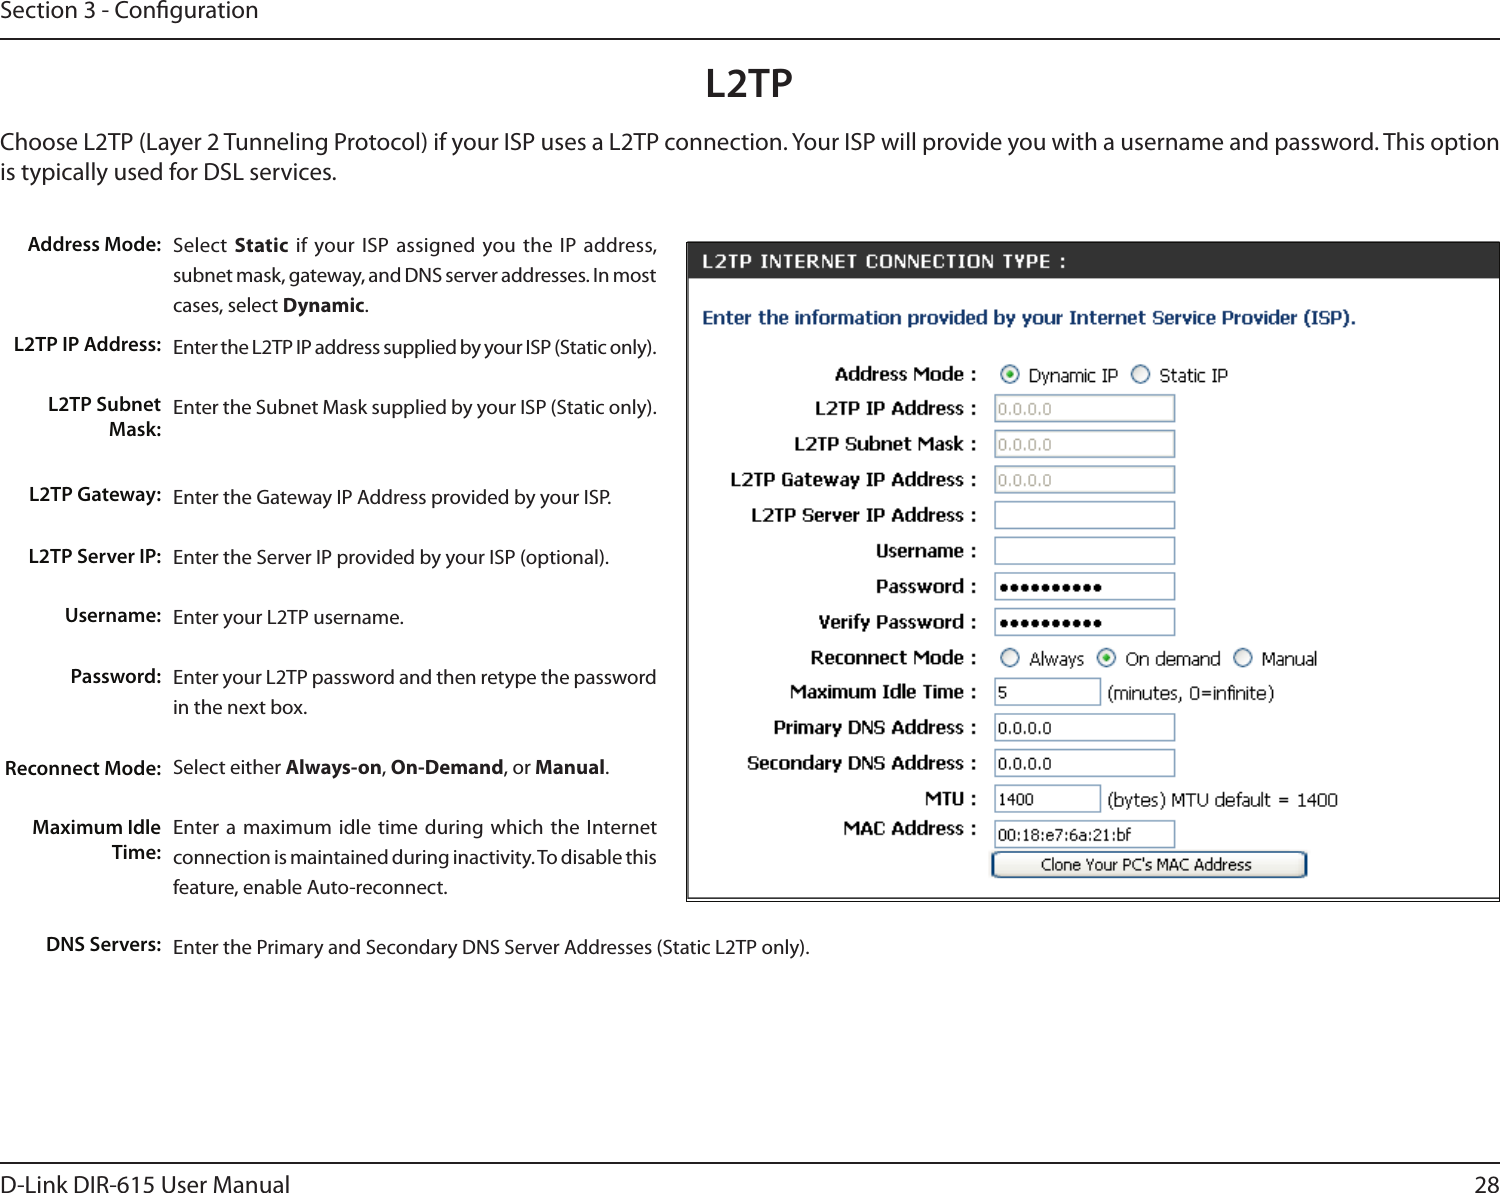 28D-Link DIR-615 User ManualSection 3 - CongurationSelect  Static if your ISP assigned you the  IP  address, subnet mask, gateway, and DNS server addresses. In most cases, select Dynamic.Enter the L2TP IP address supplied by your ISP (Static only).Enter the Subnet Mask supplied by your ISP (Static only).Enter the Gateway IP Address provided by your ISP.Enter the Server IP provided by your ISP (optional).Enter your L2TP username.Enter your L2TP password and then retype the password in the next box.Select either Always-on, On-Demand, or Manual.Enter a  maximum  idle time  during which the Internet connection is maintained during inactivity. To disable this feature, enable Auto-reconnect.Enter the Primary and Secondary DNS Server Addresses (Static L2TP only).Address Mode:L2TP IP Address:L2TP Subnet Mask:L2TP Gateway:L2TP Server IP:Username:Password:Reconnect Mode:Maximum Idle Time: DNS Servers:L2TPChoose L2TP (Layer 2 Tunneling Protocol) if your ISP uses a L2TP connection. Your ISP will provide you with a username and password. This option is typically used for DSL services. 